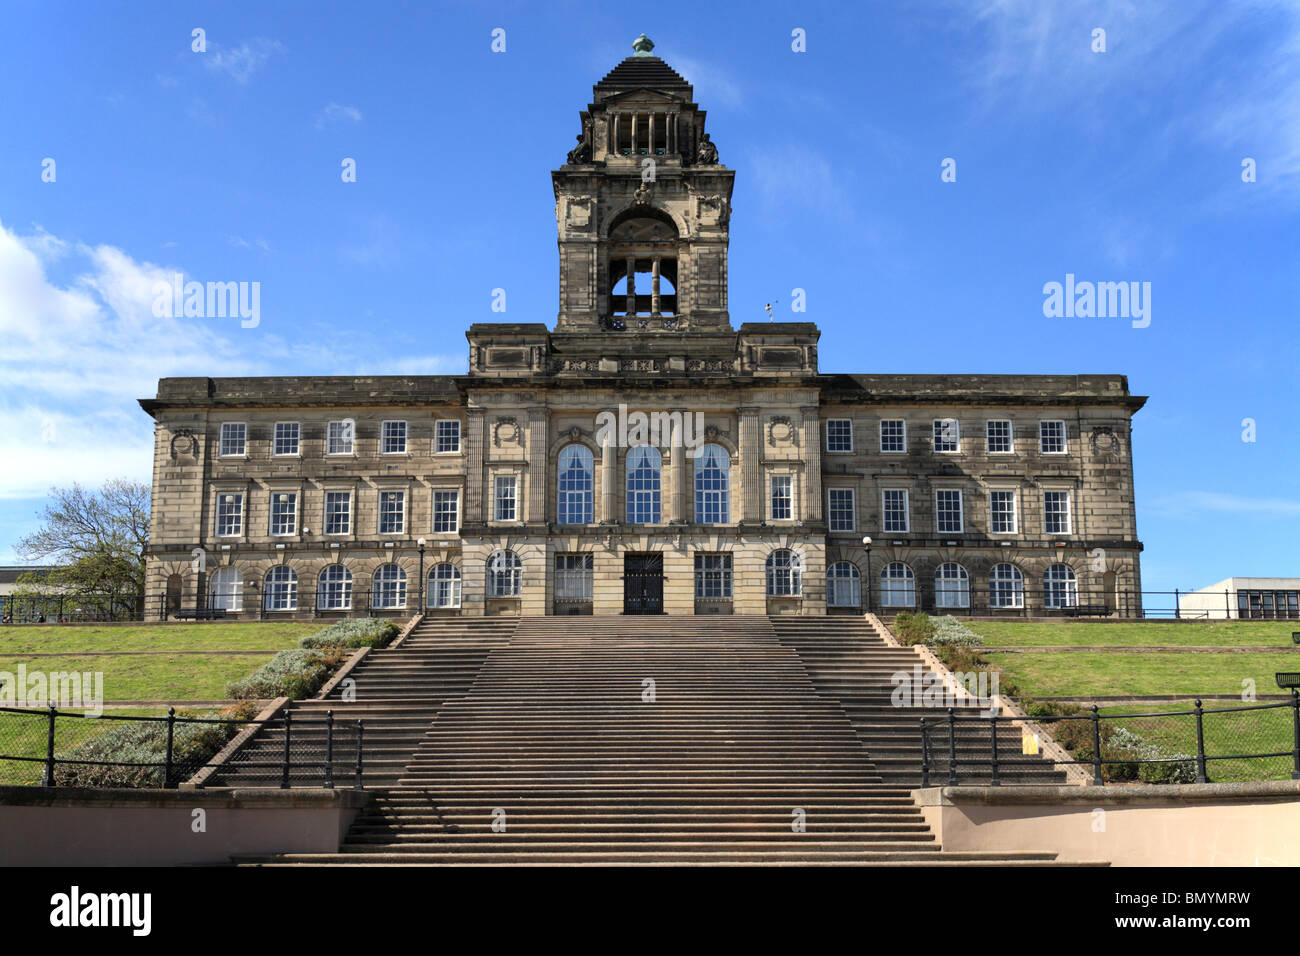 Wallasey Town Hall, Wirral Merseyside. Fiume Mersey waterfront, Liverpool, England, Regno Unito Foto Stock